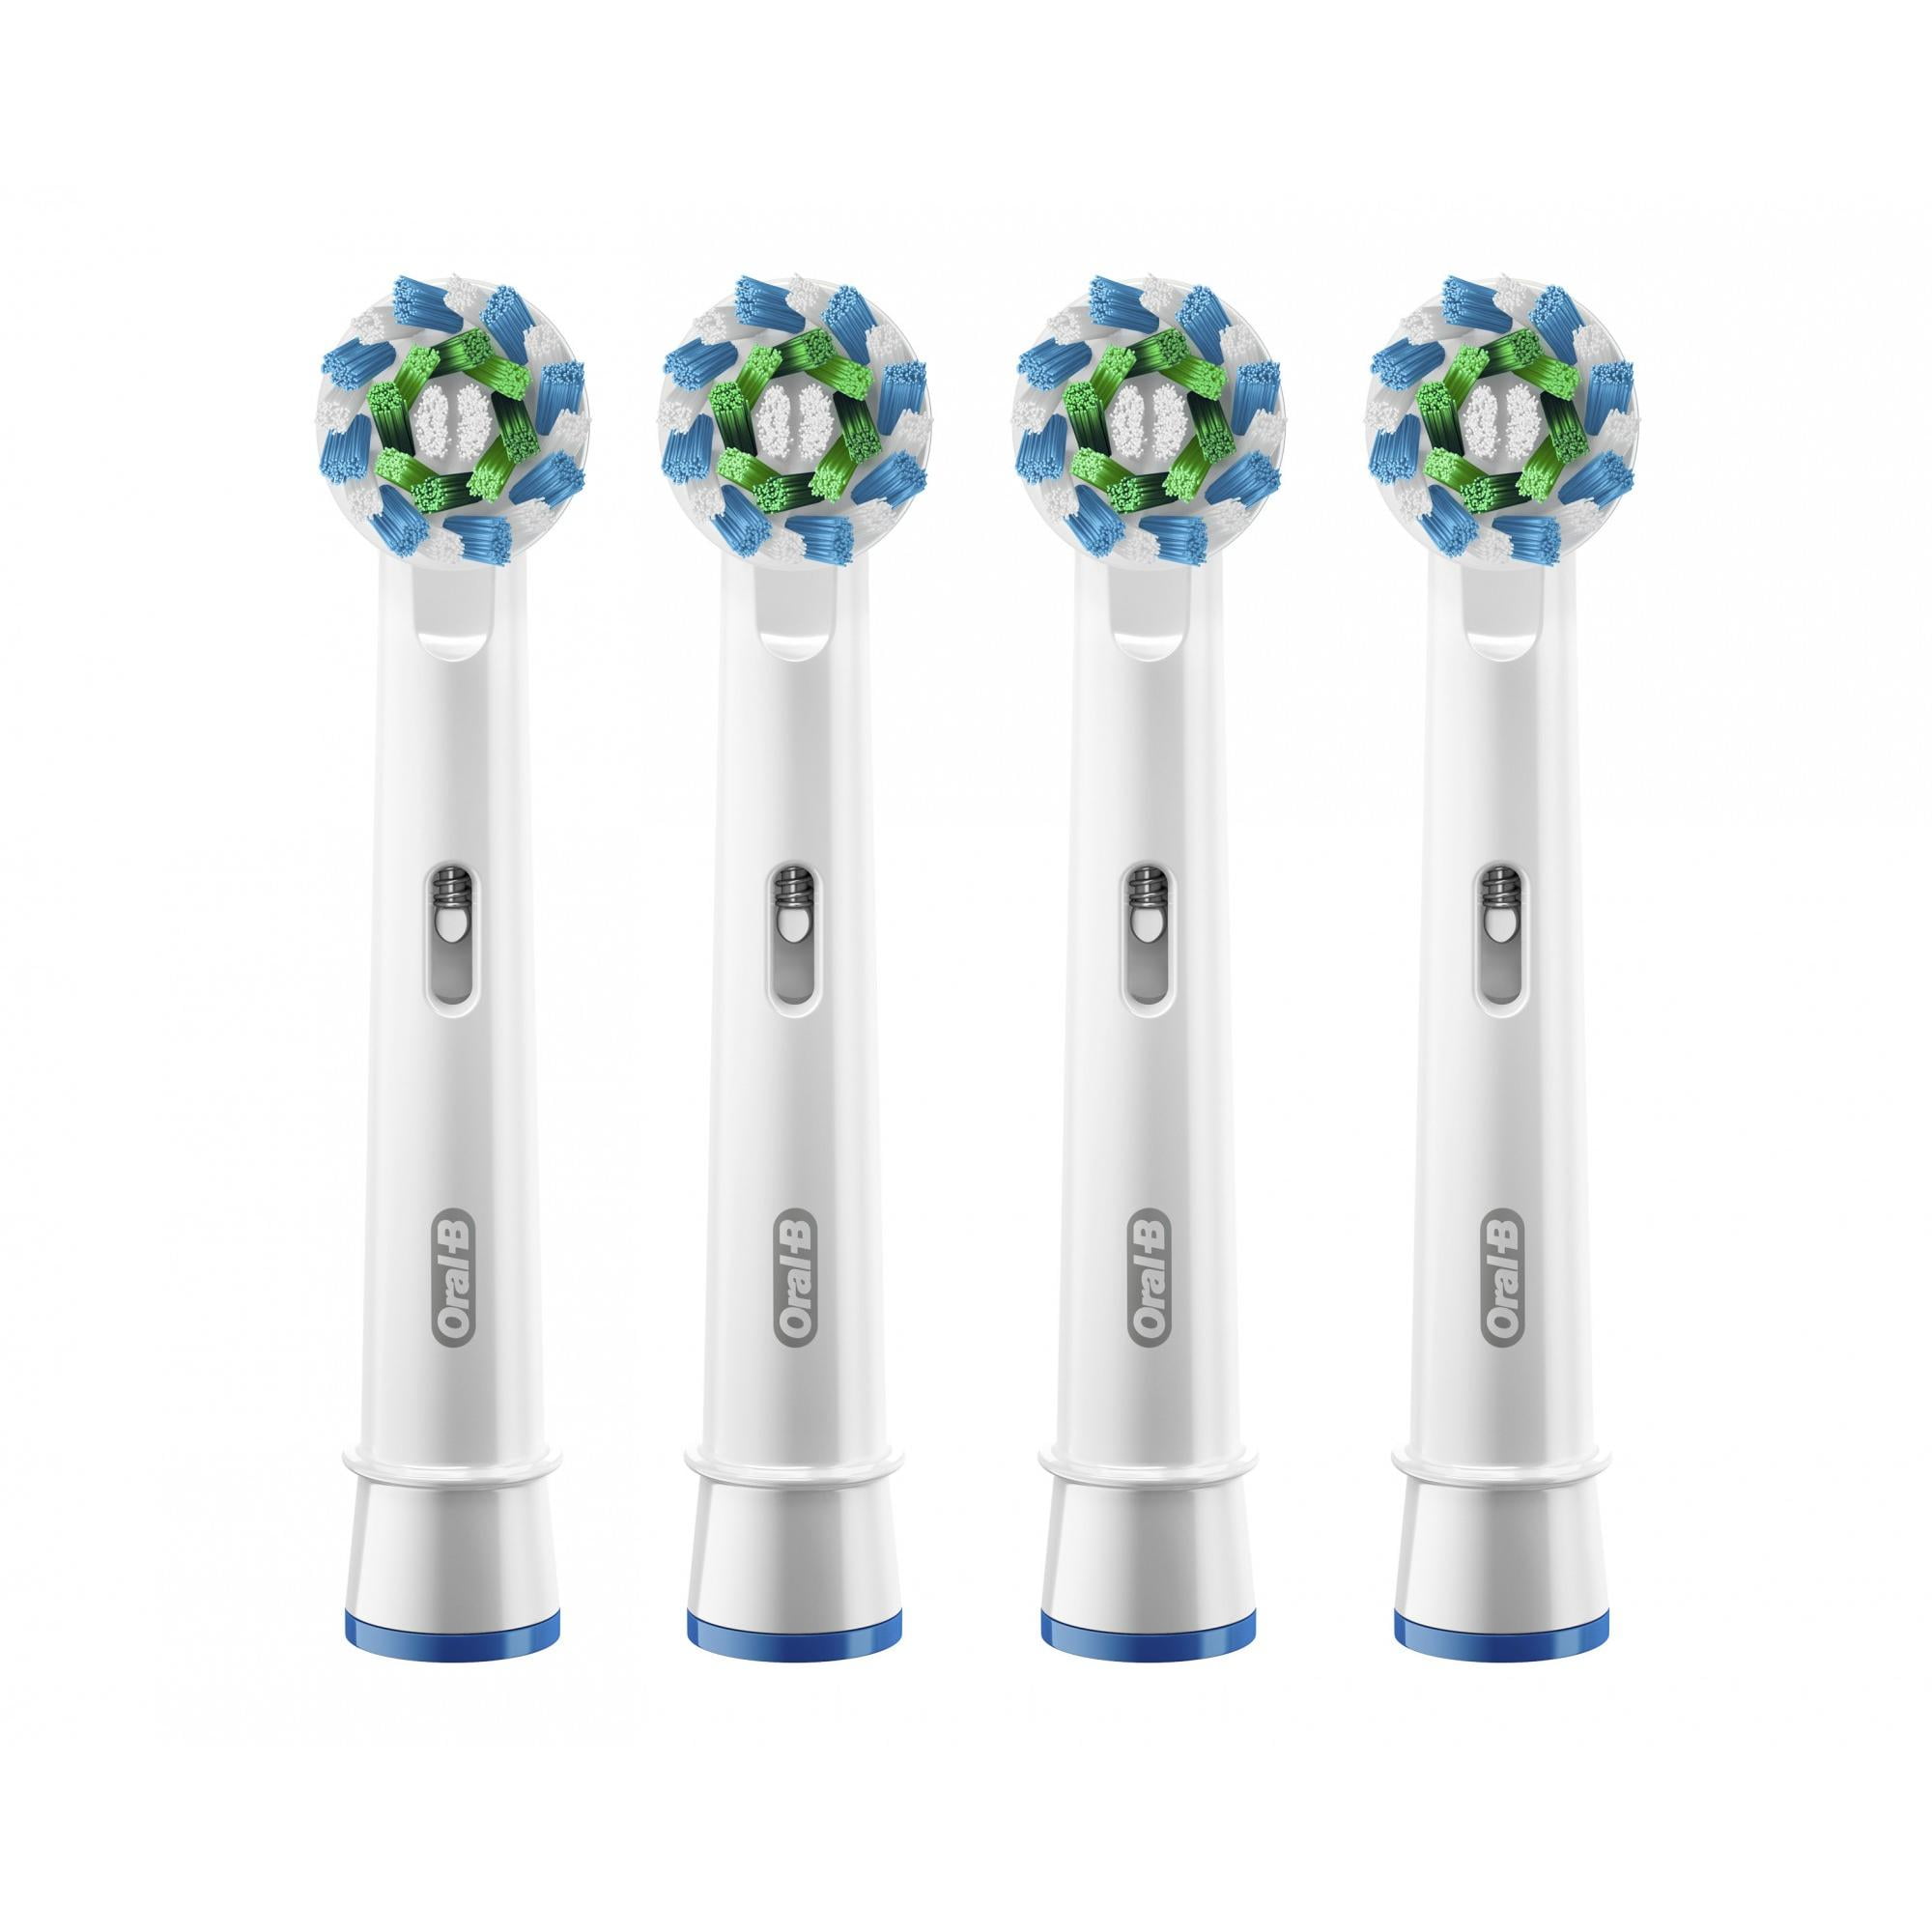 oral-b-crossaction-electric-toothbrush-heads-white-4-ct-walmart